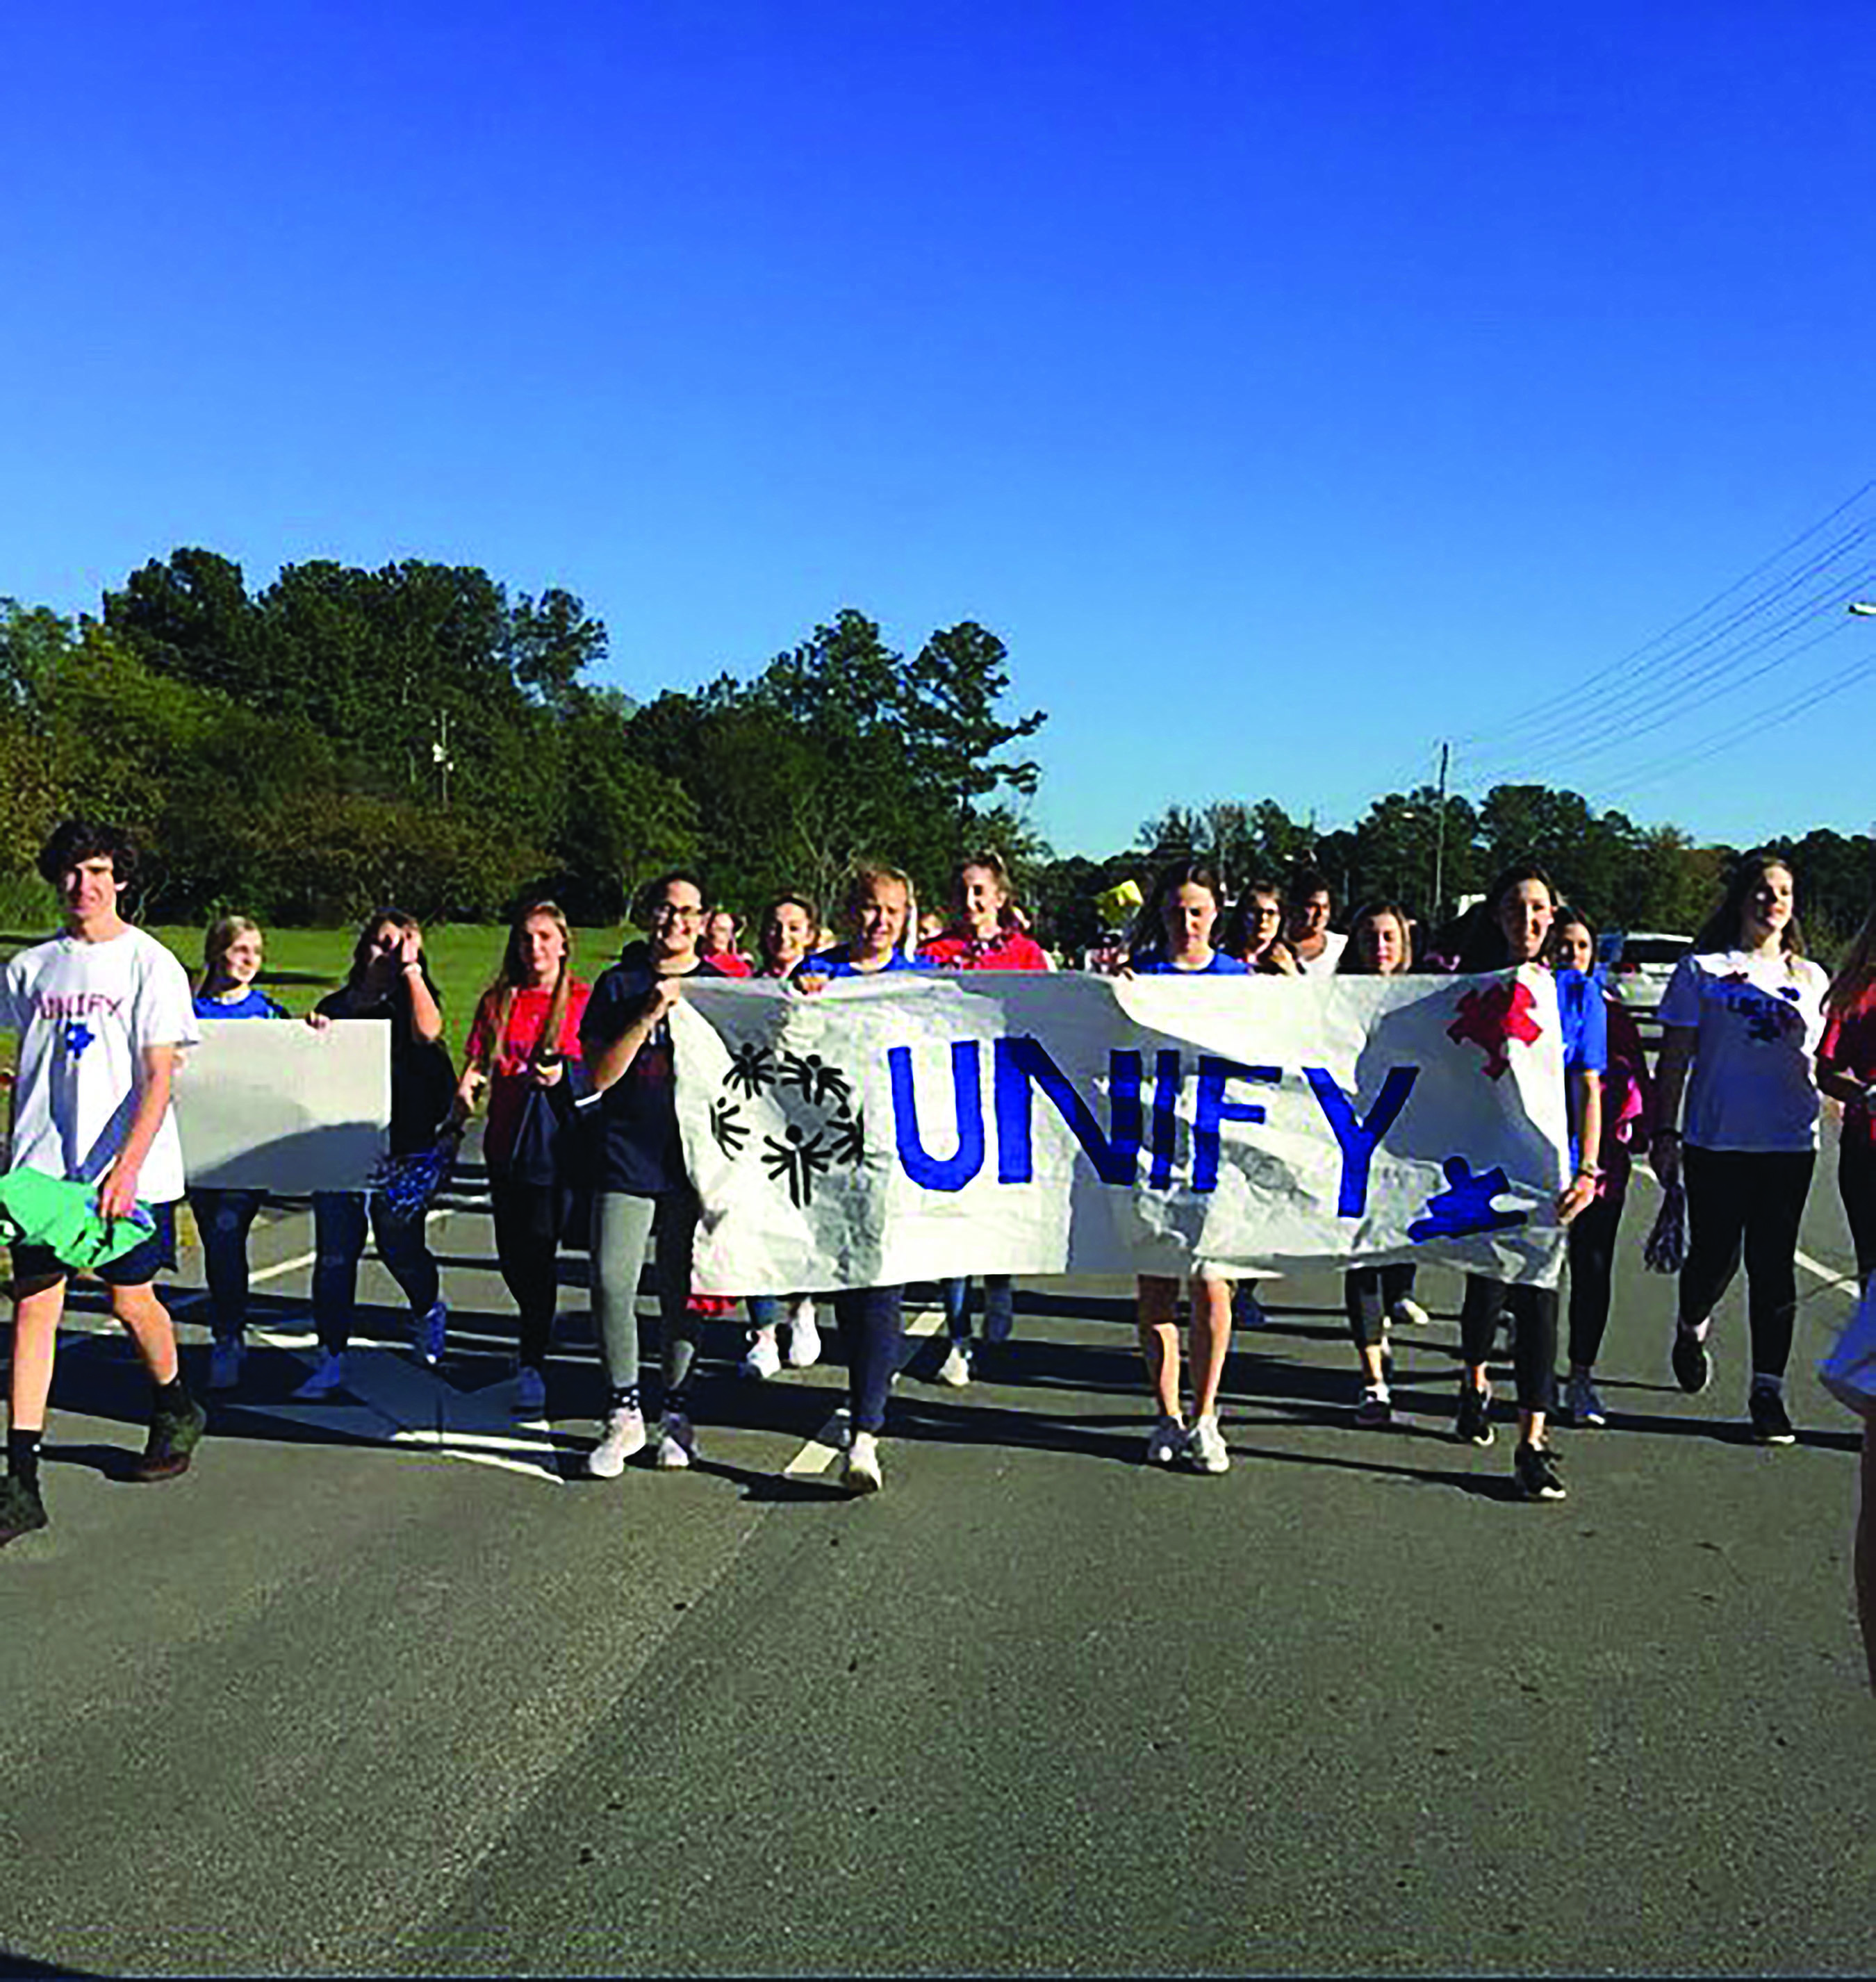 Spreading A Message Of Unity,  One Student At A Time 	By: Stacy Kivett